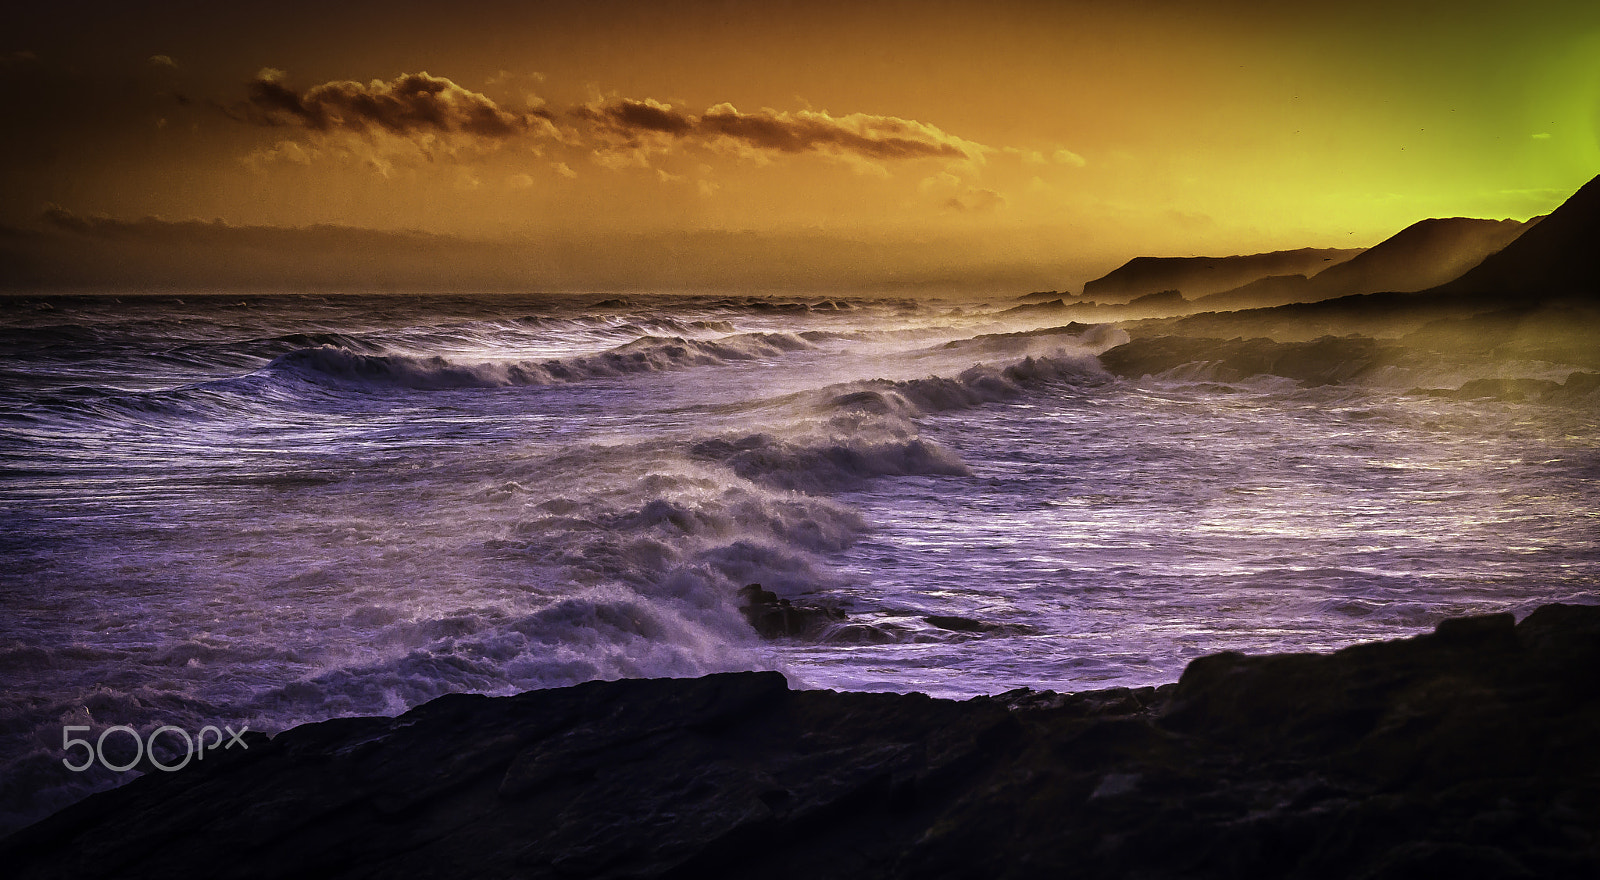 Sigma 24-105mm f/4 DG OS HSM | A sample photo. Storm at sunset photography